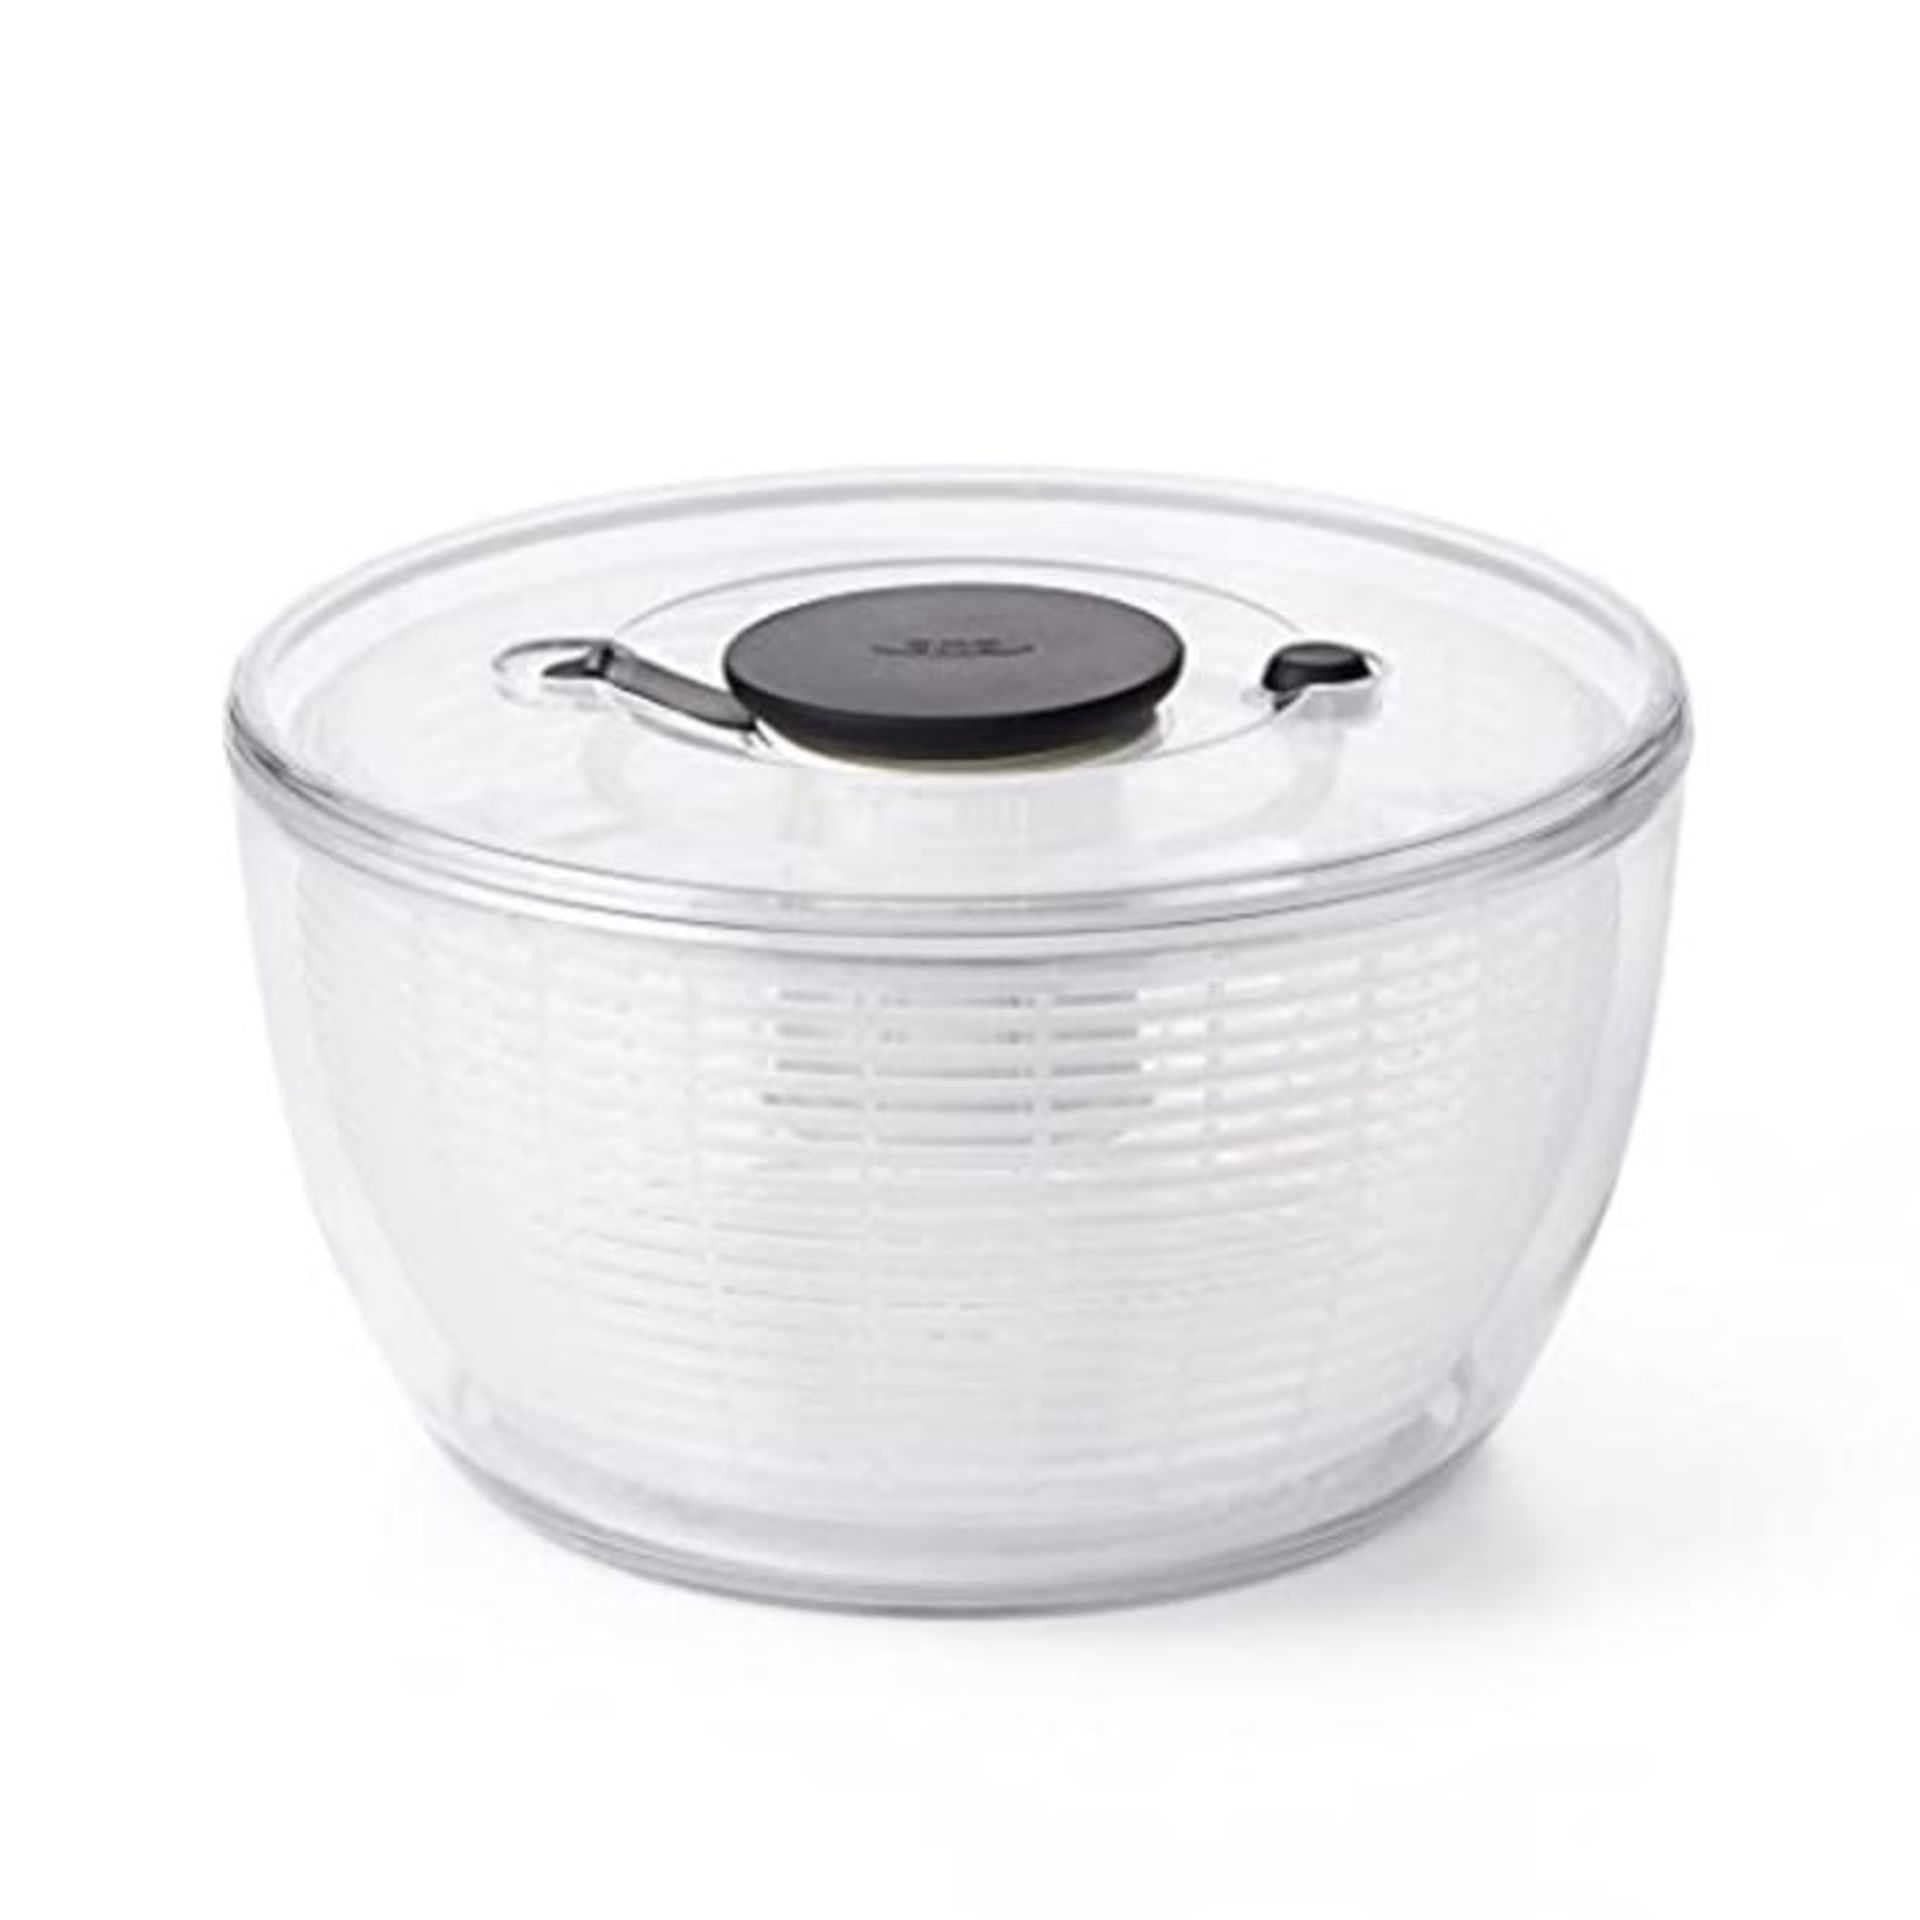 OXO Good Grips Salad Spinner, Large